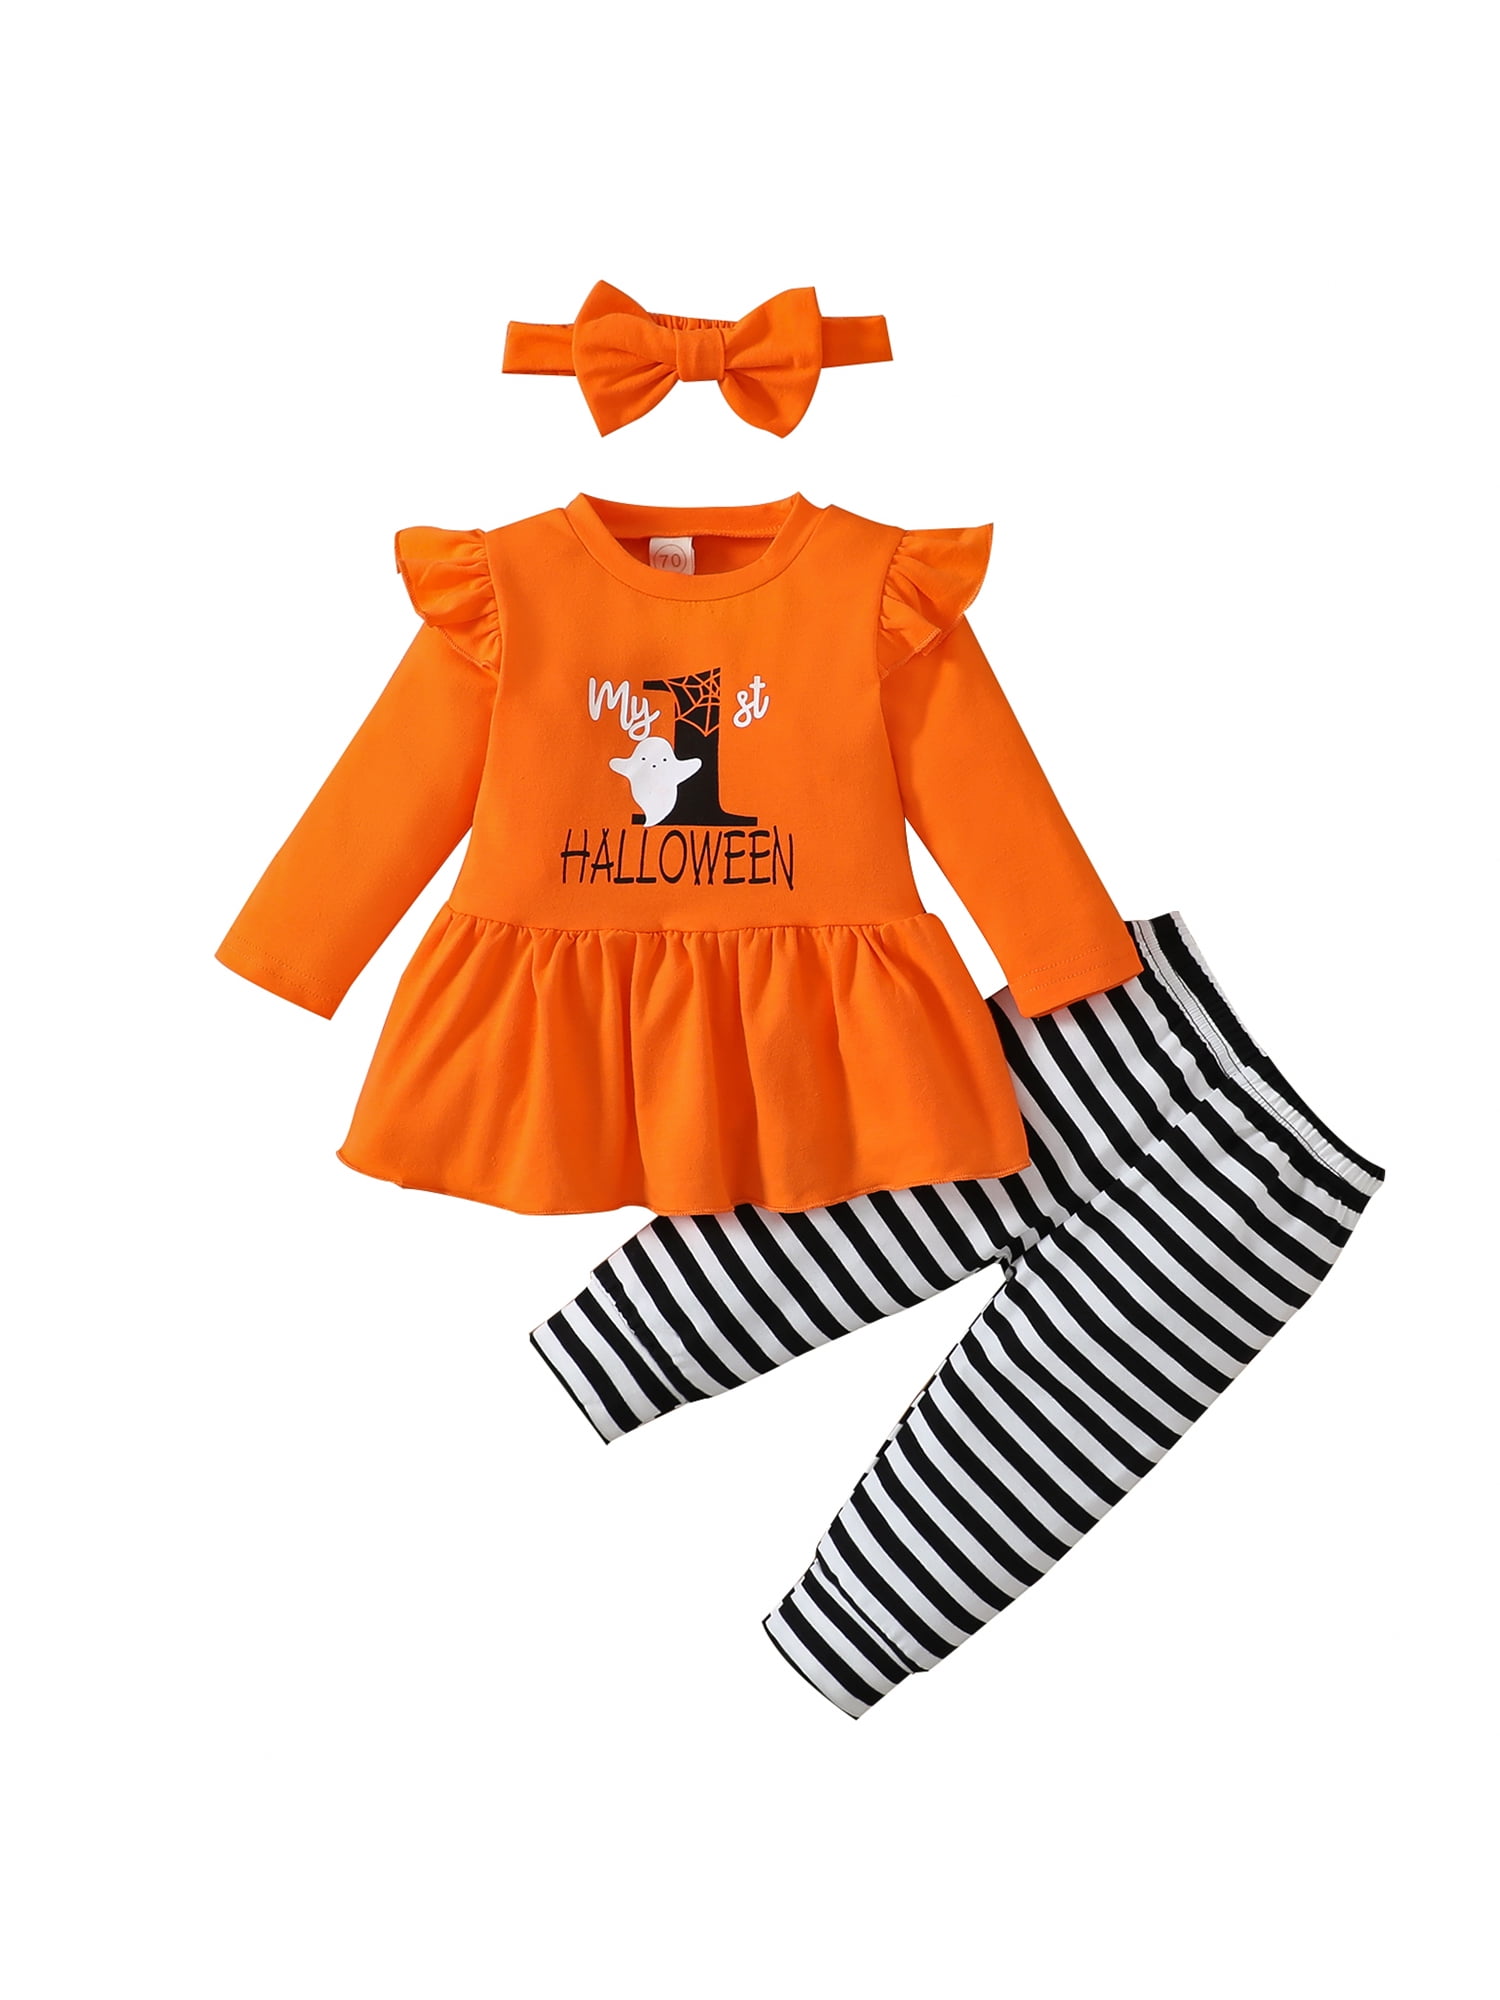 Baby Girls Blouse Thanksgiving Halloween Christmas Outfits Ruffle Long Sleeve Letter Print T Shirt Top 